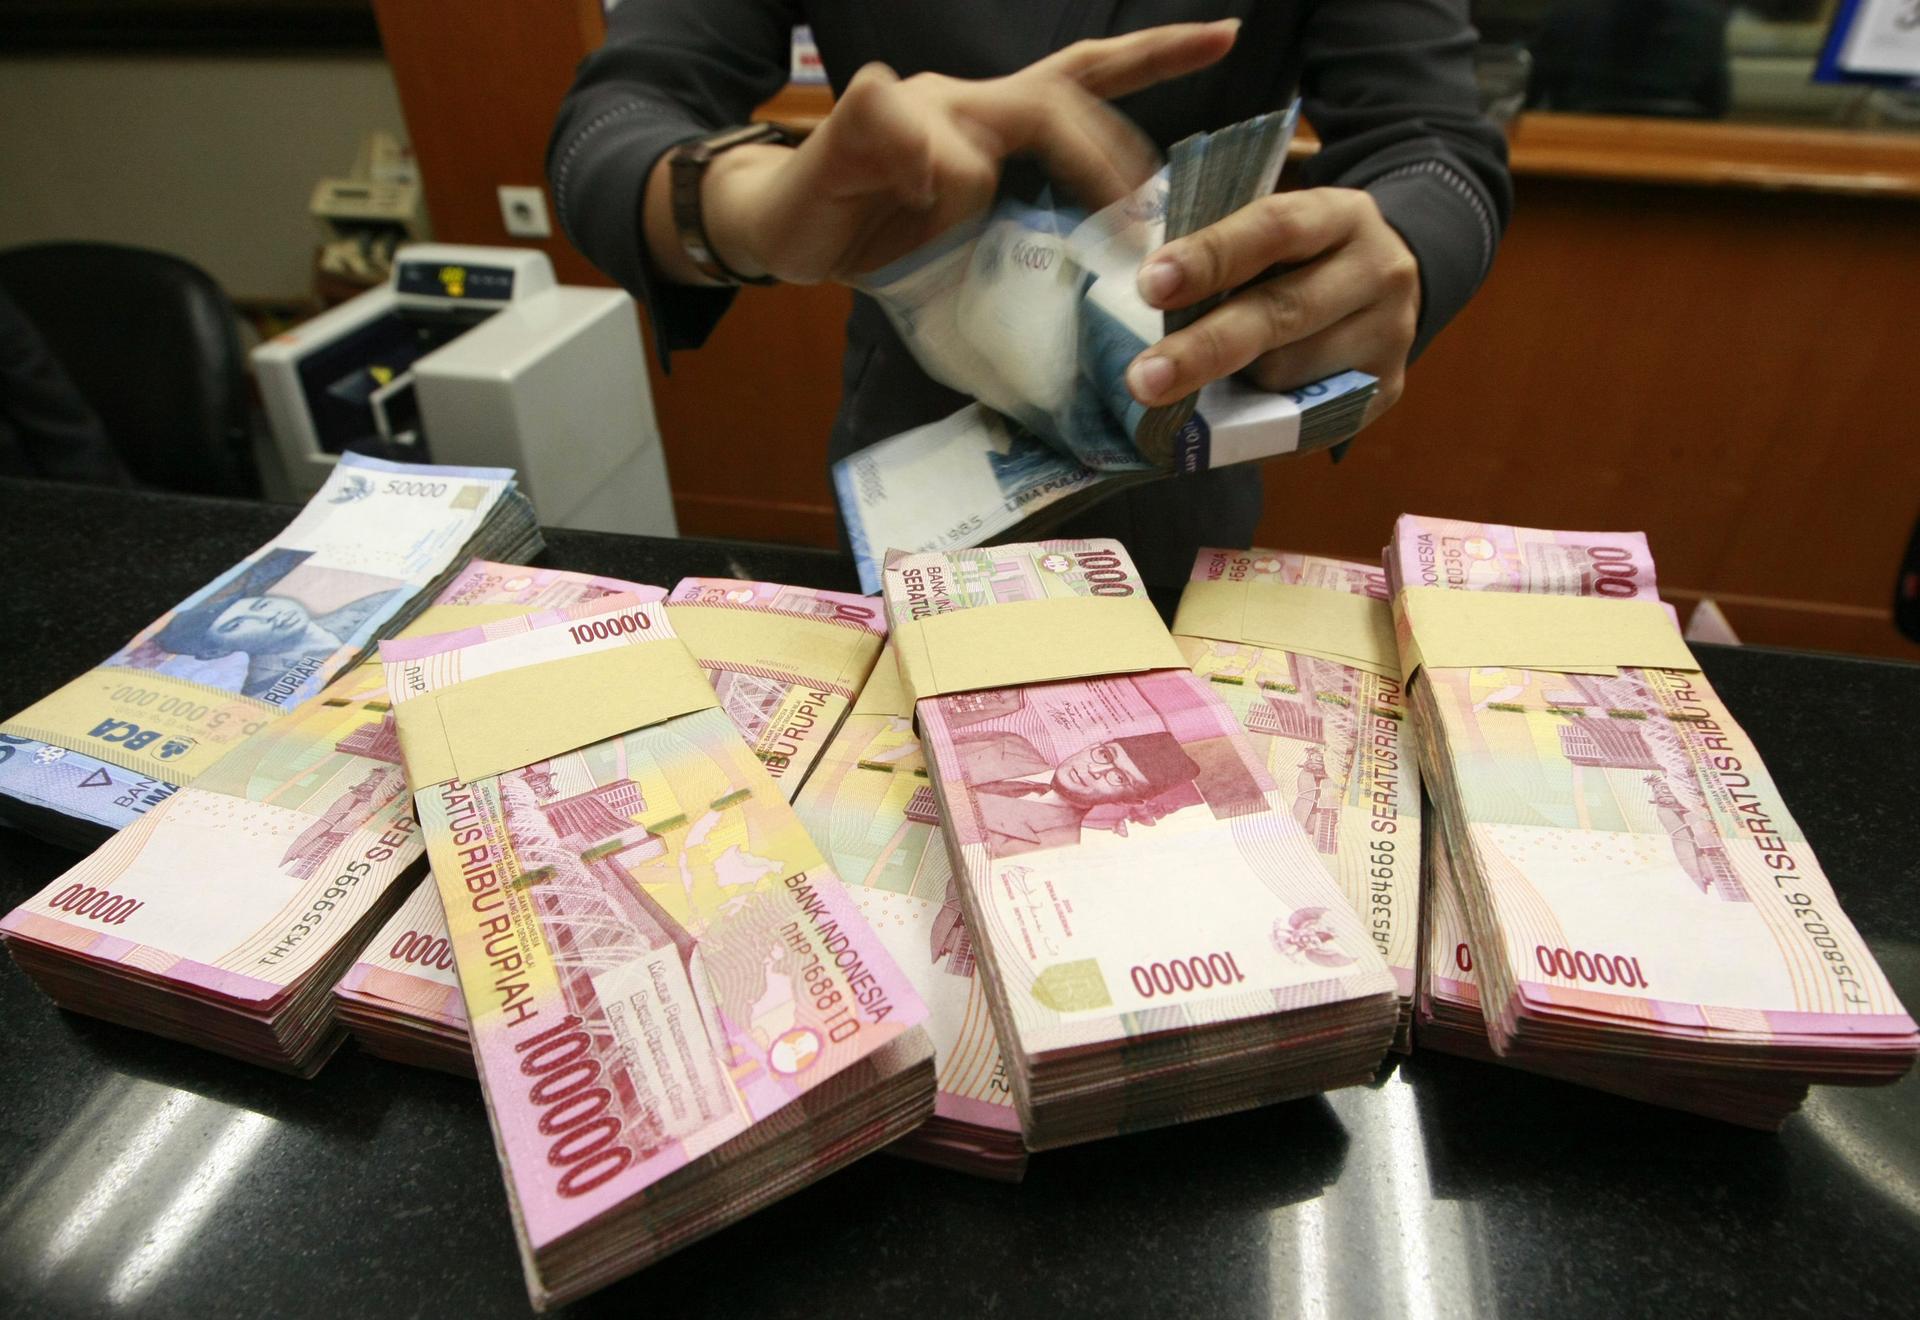 Indonesia's rupiah fell to its weakest level for 17 years. Photo: EPA